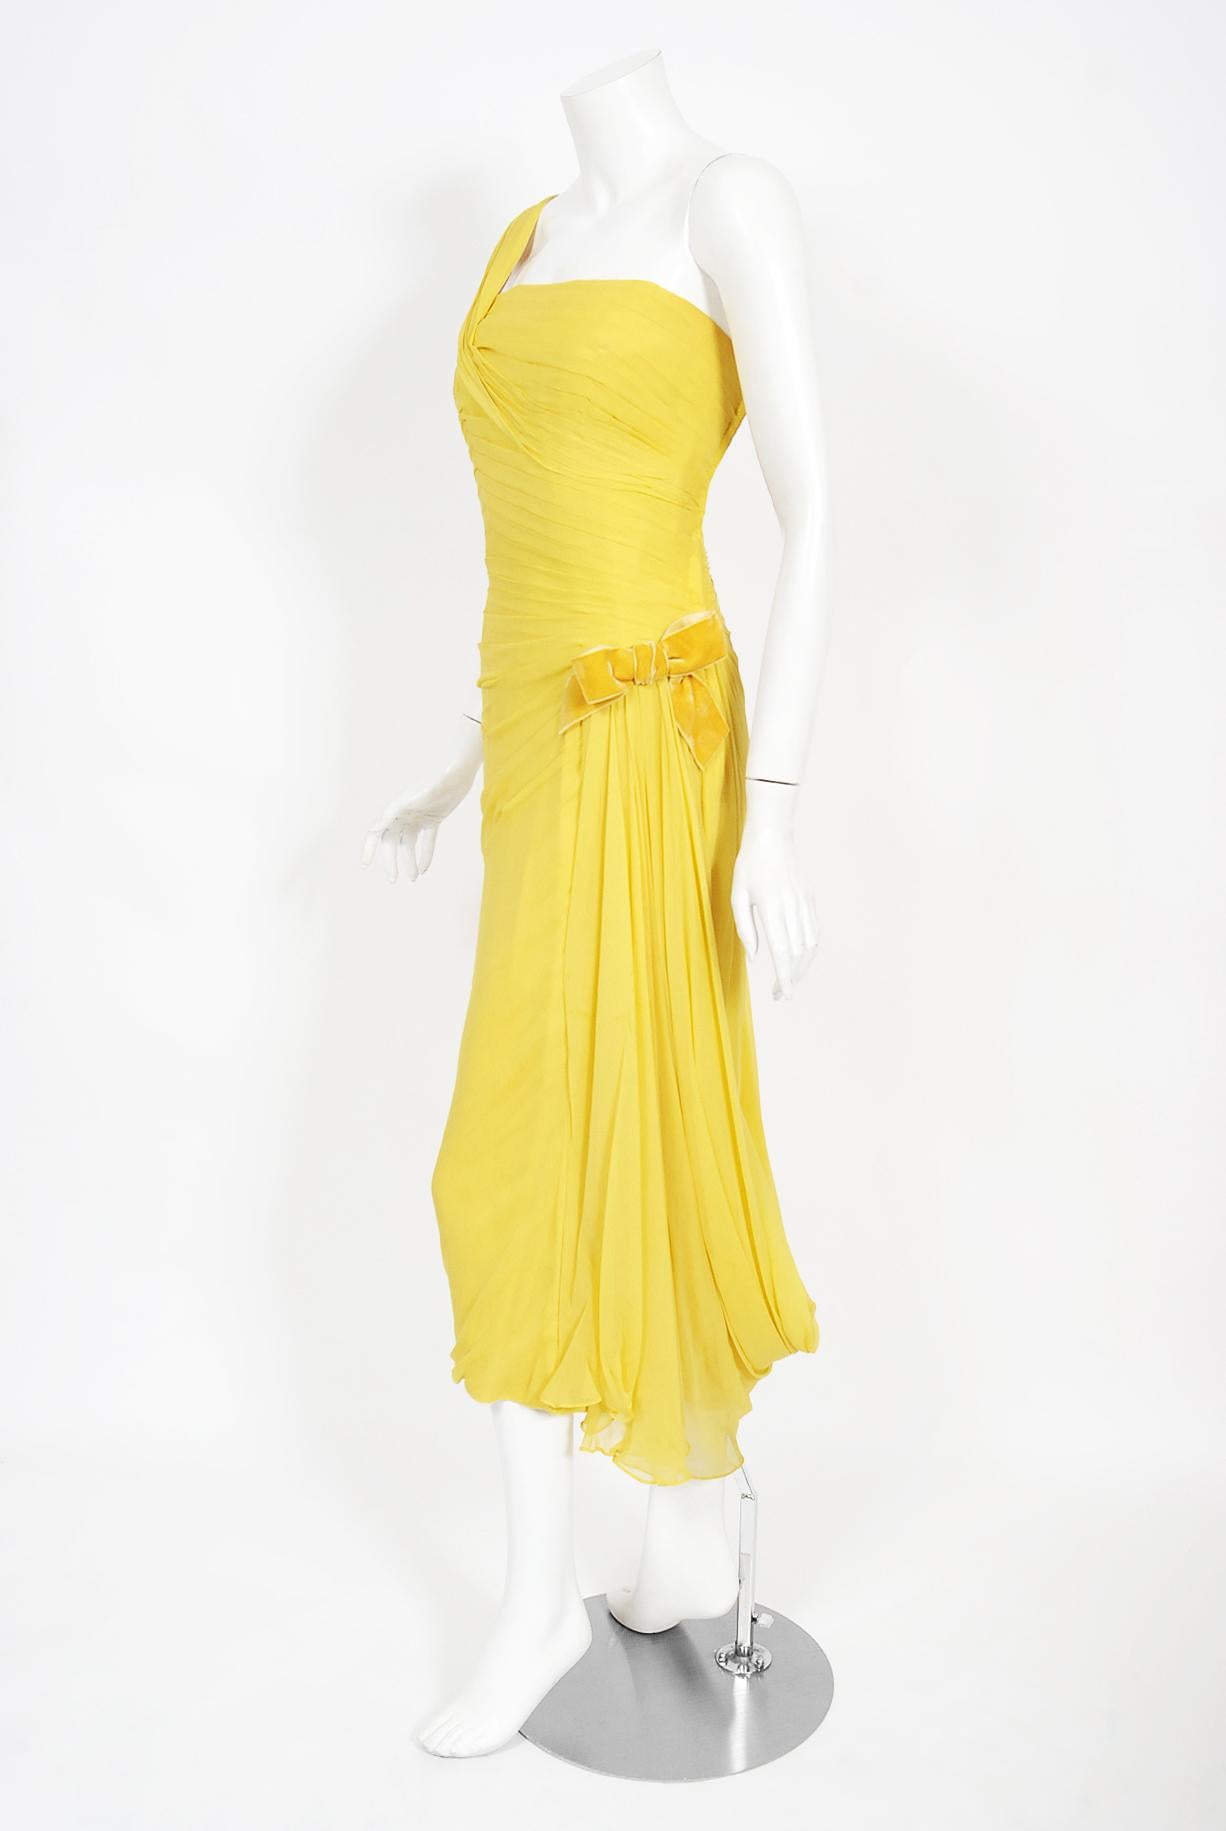 Vintage 1950's Philip Hulitar Yellow Pleated Silk Chiffon Draped Hourglass Dress In Good Condition For Sale In Beverly Hills, CA